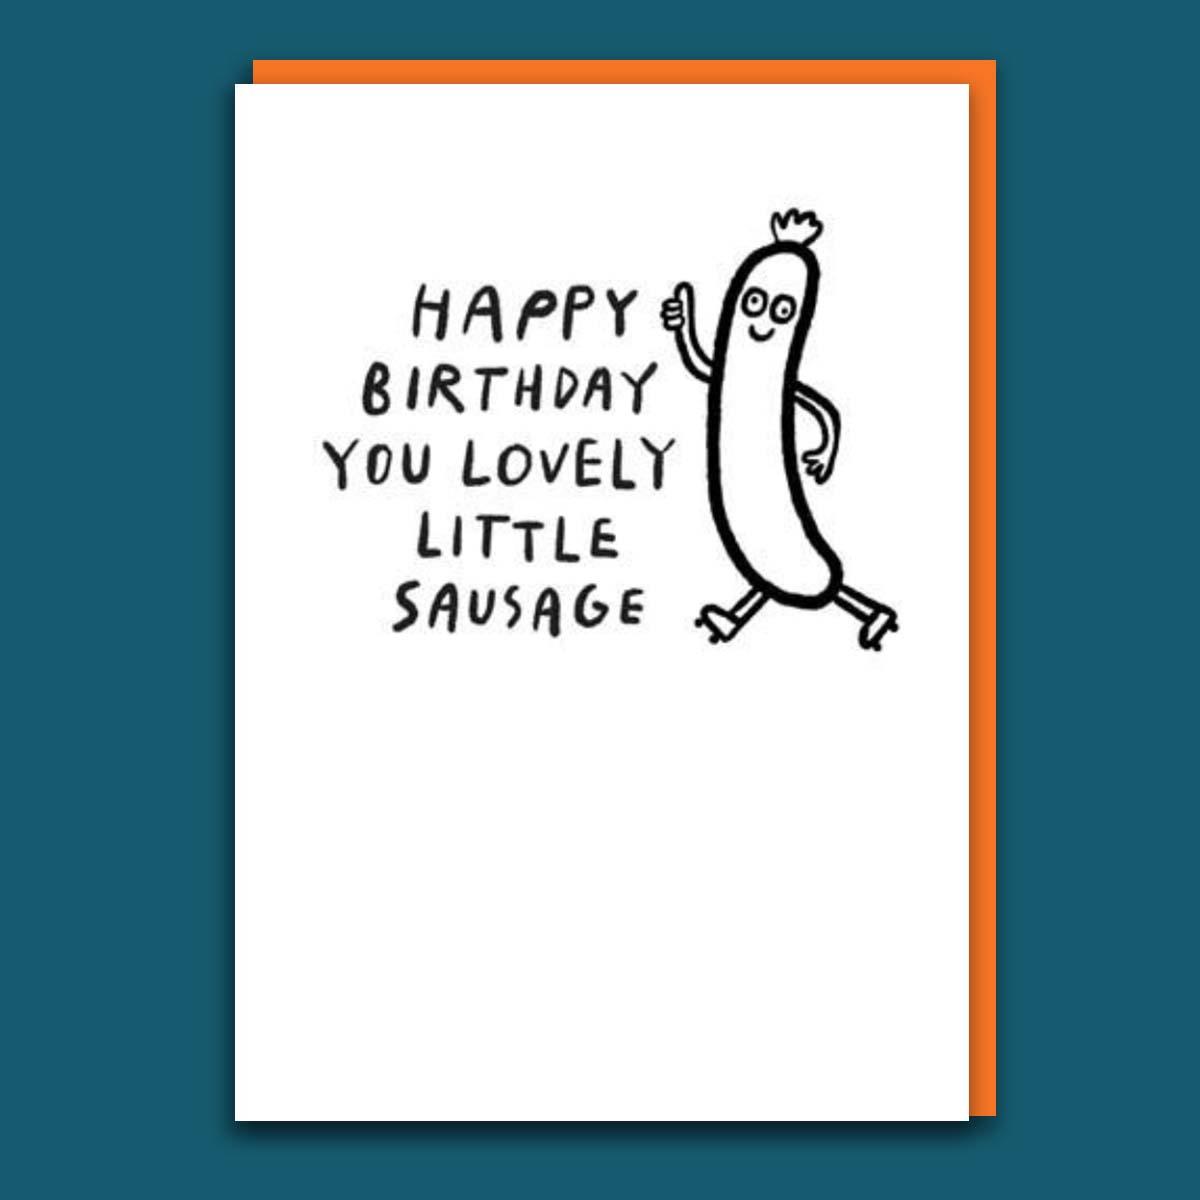 Cuckoo - Lovely Little Sausage Funny Birthday Card Front Image